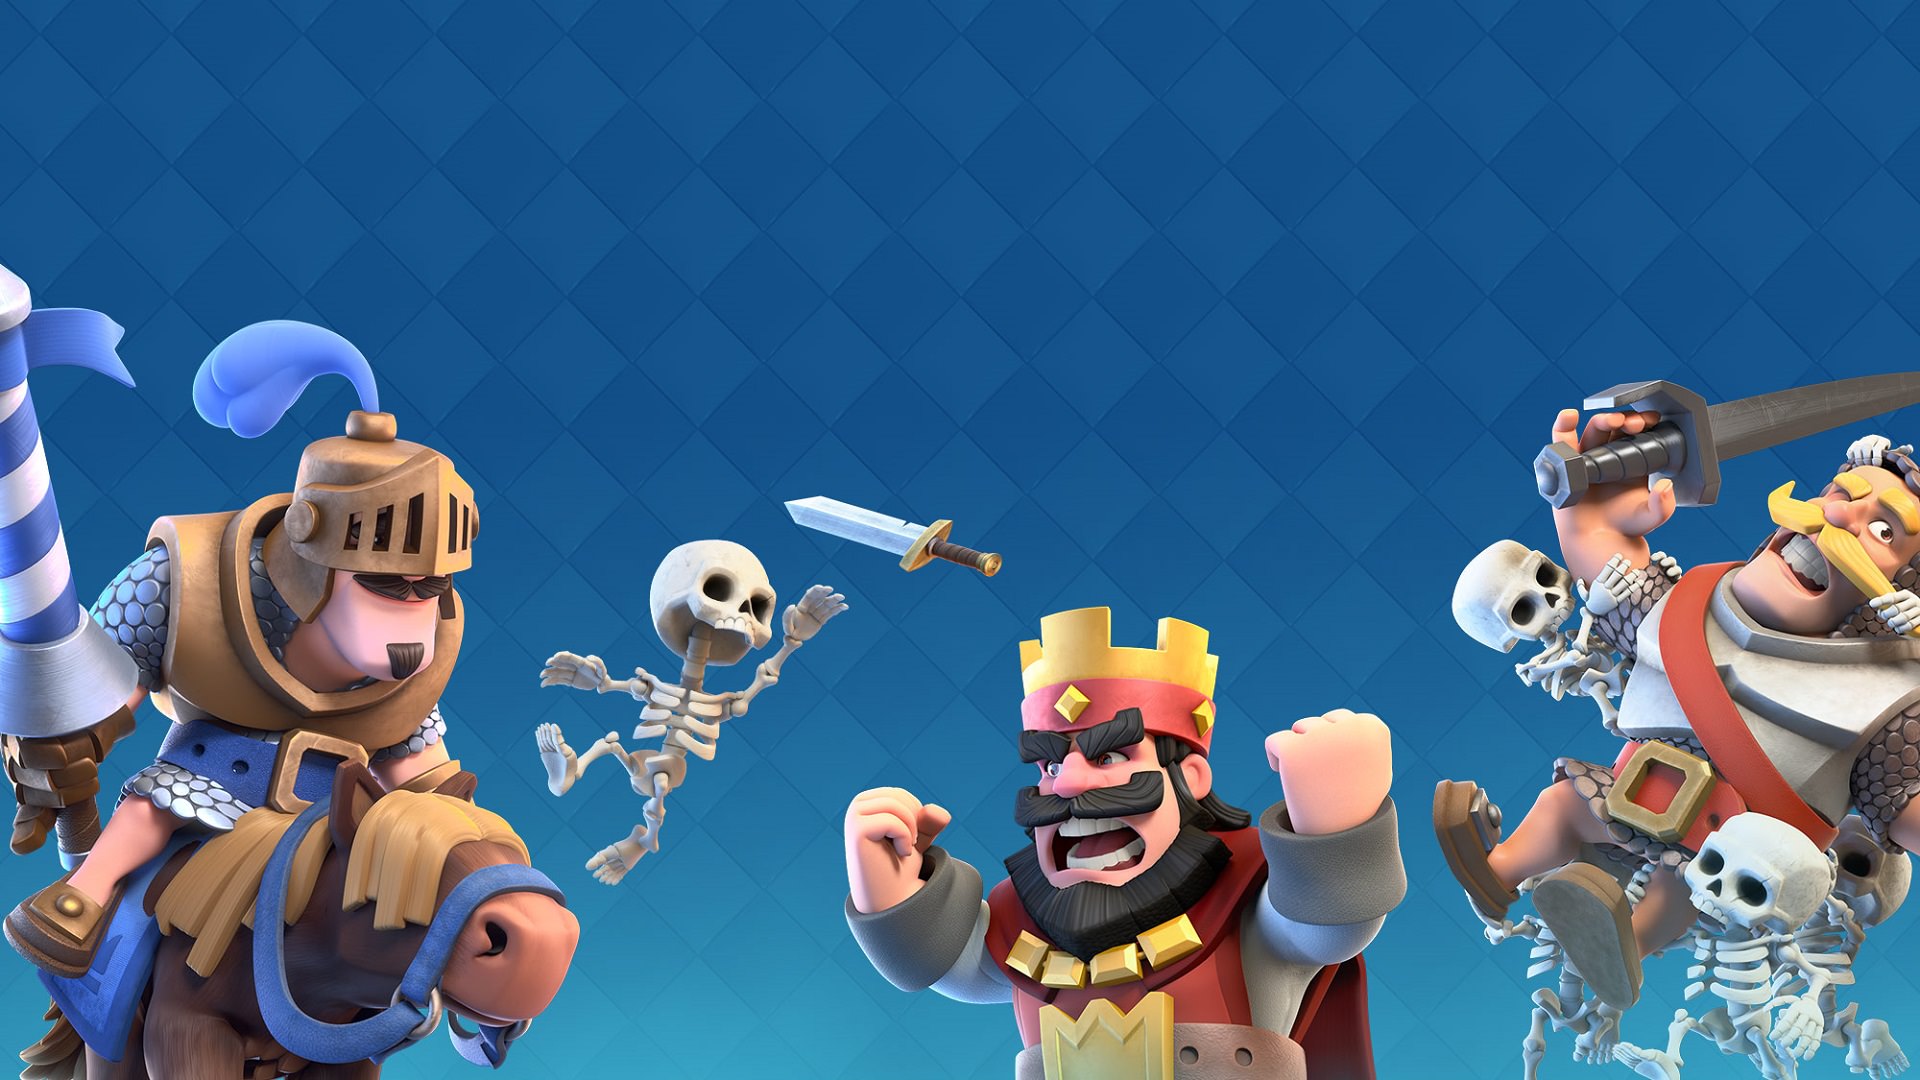 Video Game Clash Royale 1920x1080